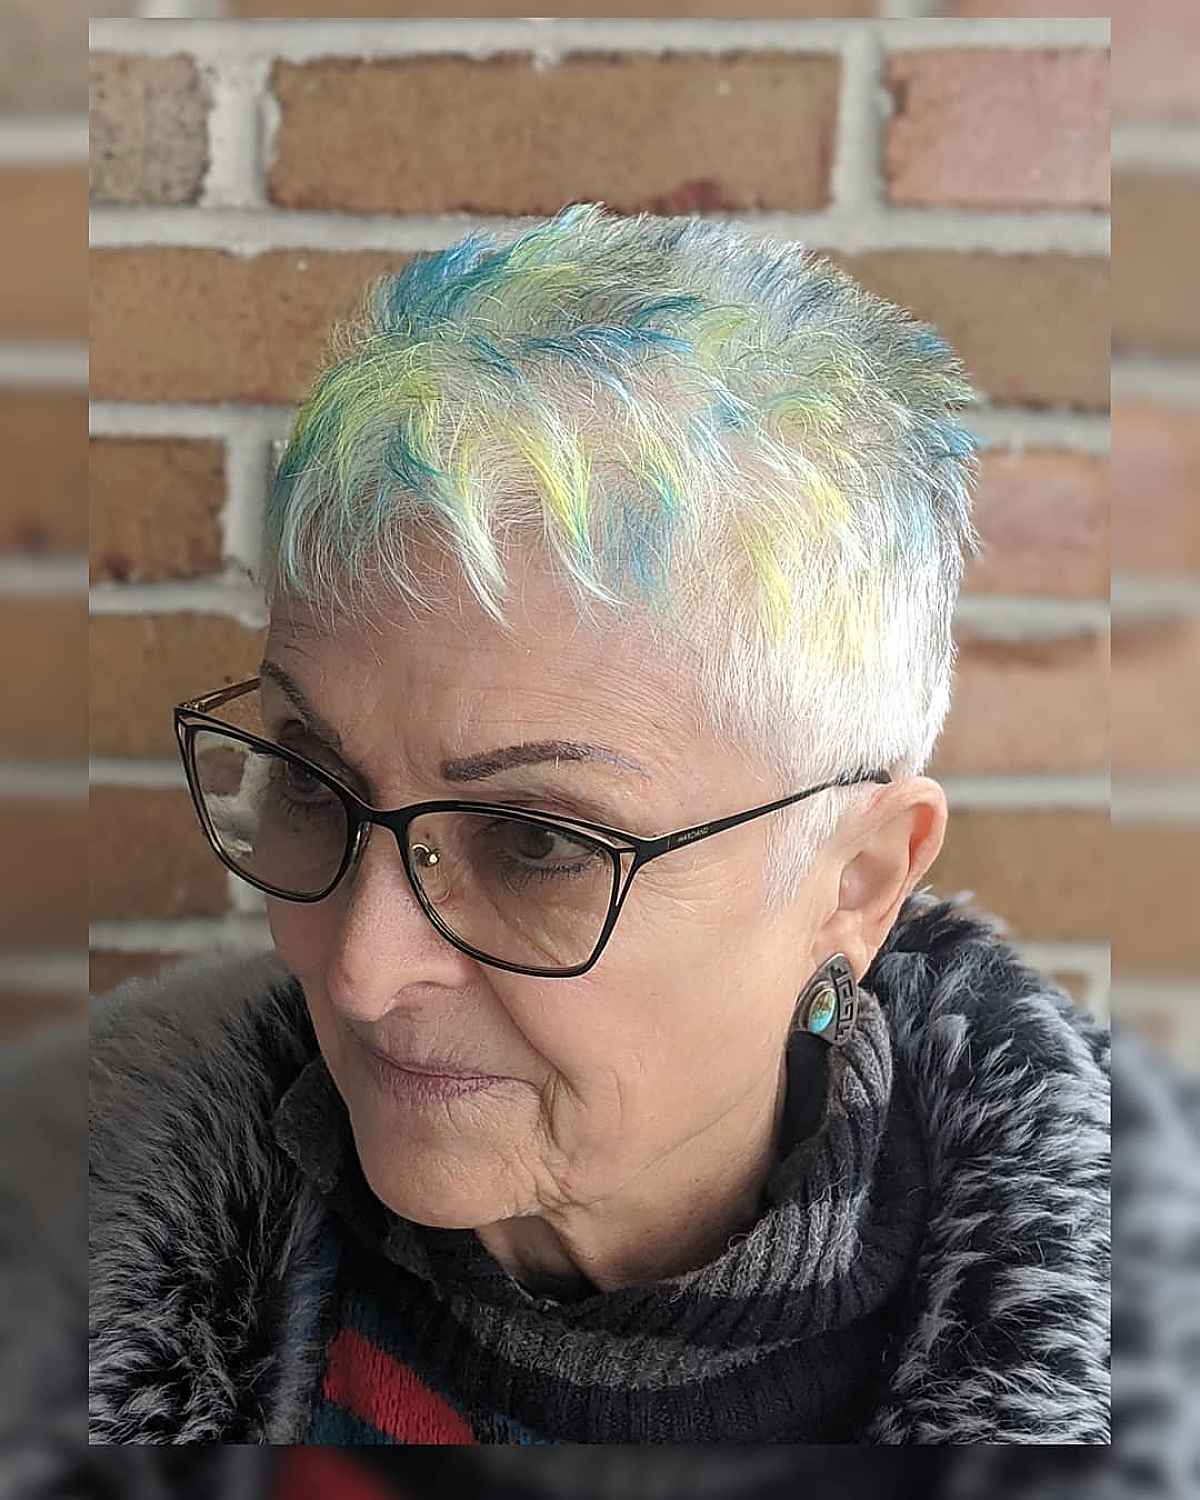 27 Short Spiky Haircuts for Women Over 60 with Sass